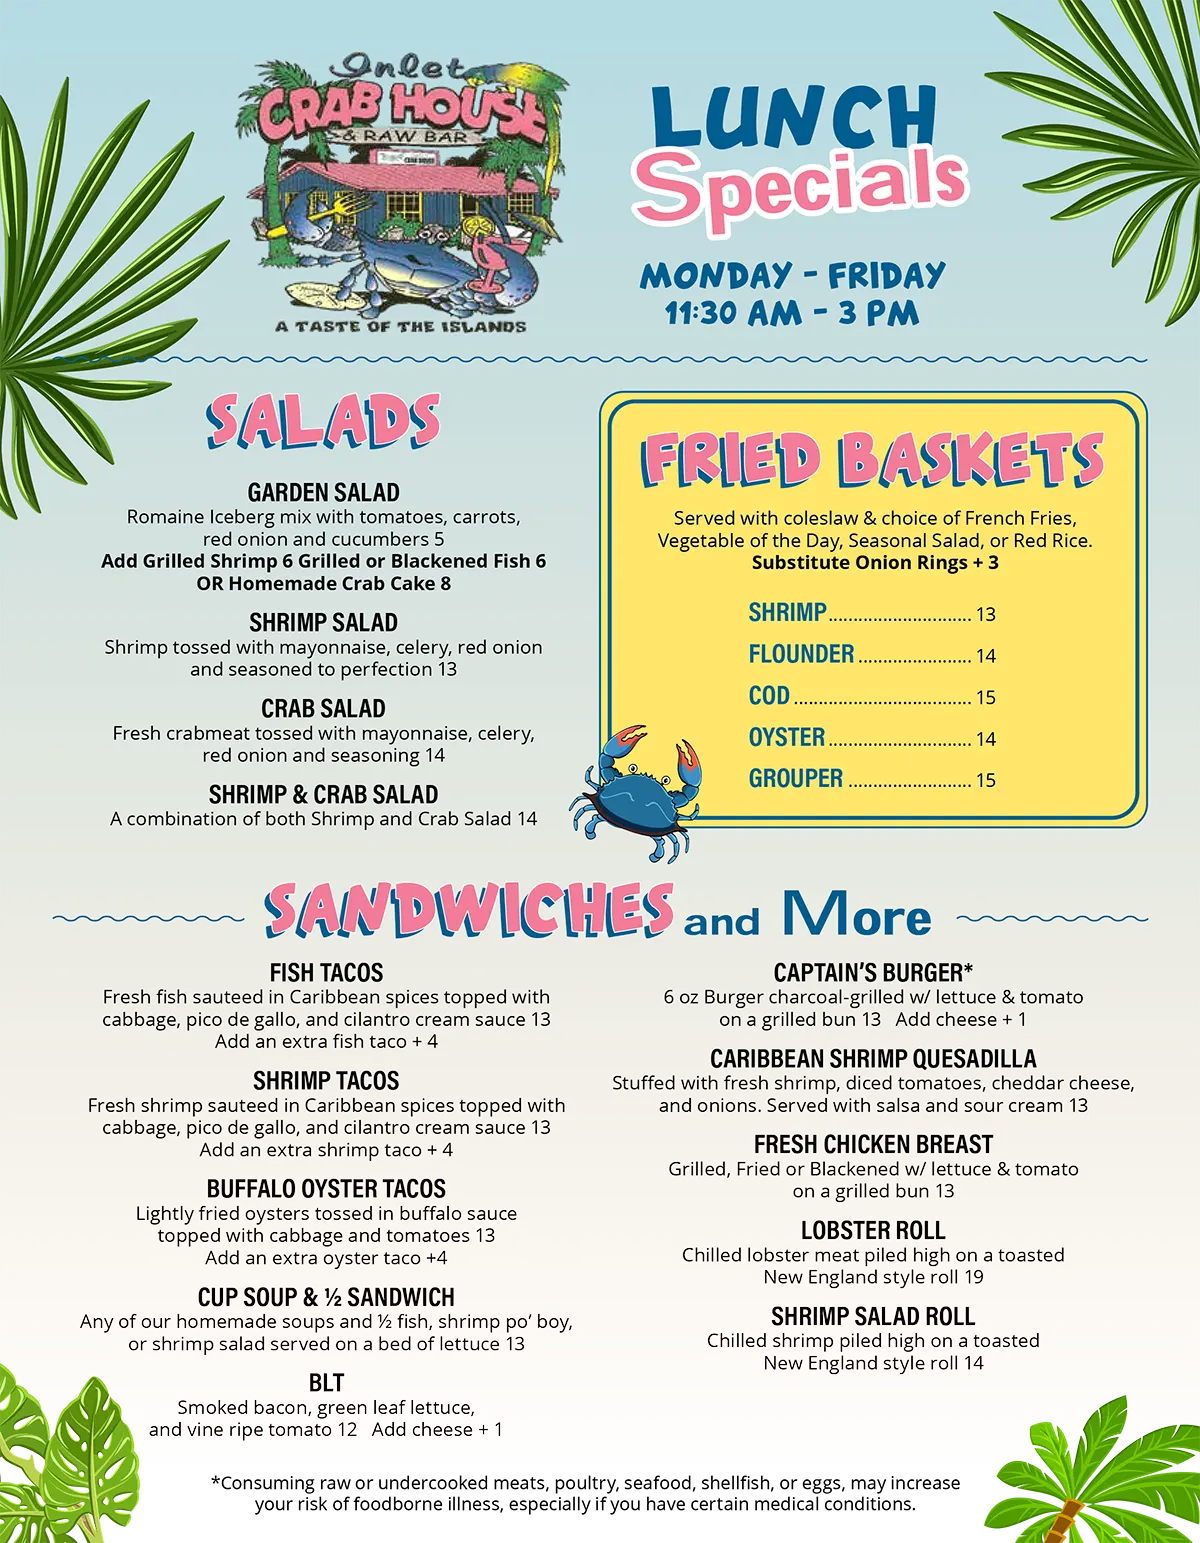 New Lunch specials for Inlet Crab House